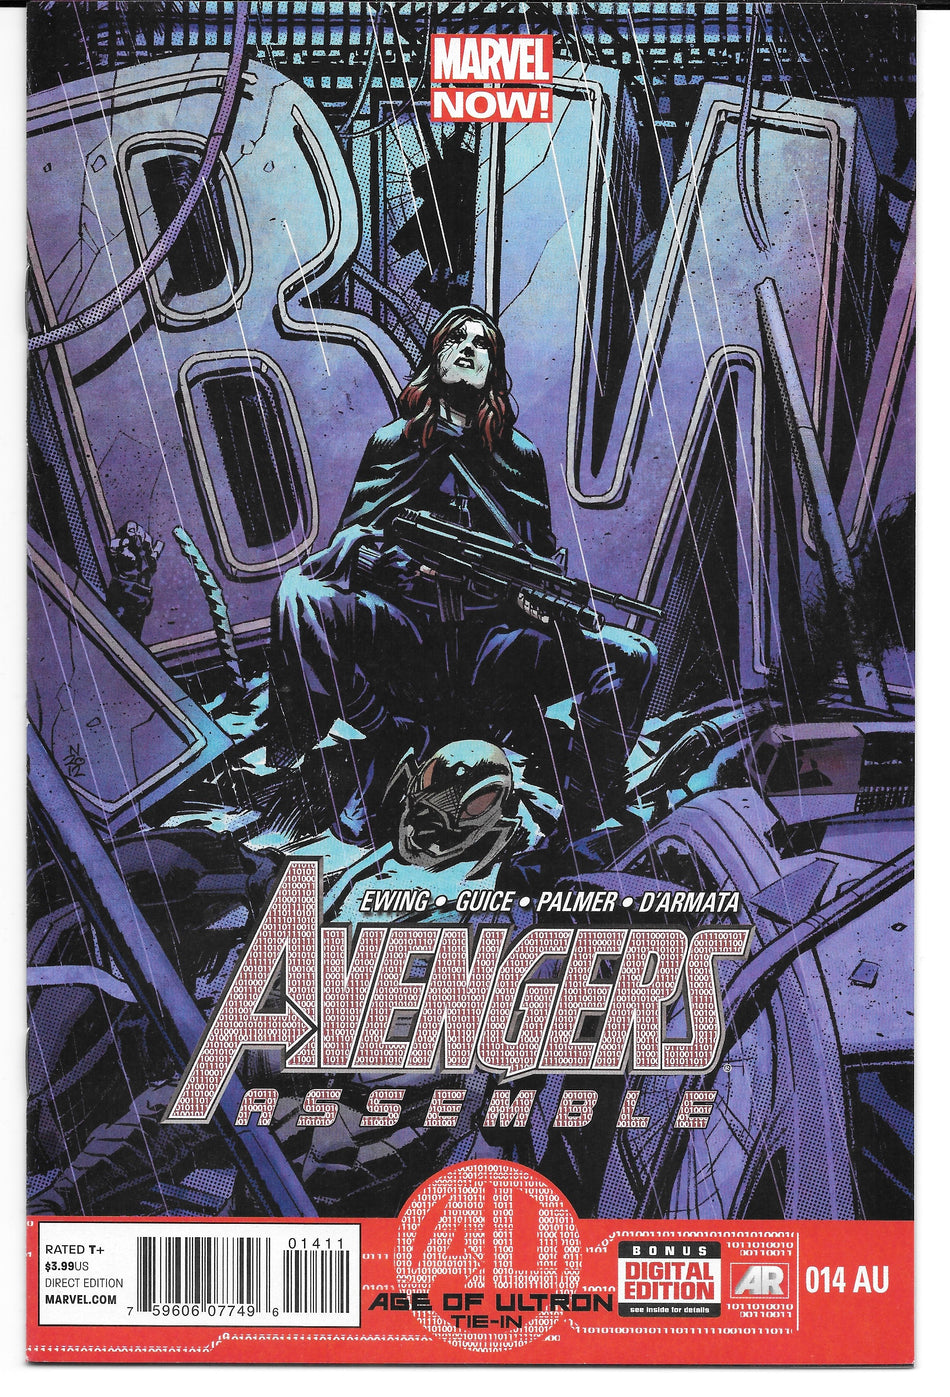 Photo of Avengers Assemble, Vol. 2 (2012) (2013) Issue 14AU-A - Near Mint Comic sold by Stronghold Collectibles